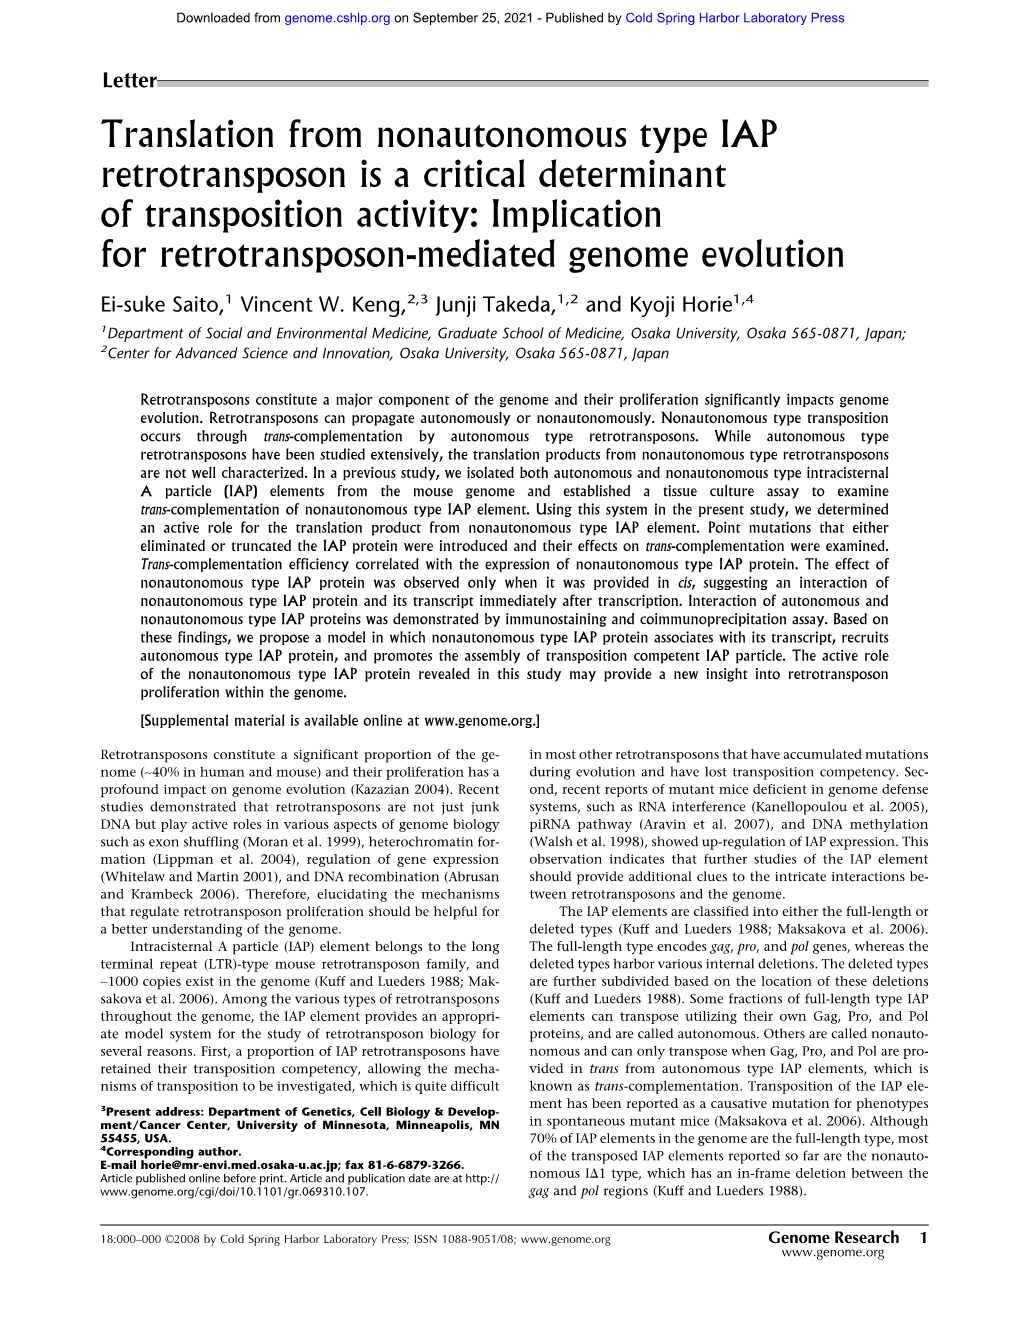 Translation from Nonautonomous Type IAP Retrotransposon Is a Critical Determinant of Transposition Activity: Implication for Retrotransposon-Mediated Genome Evolution